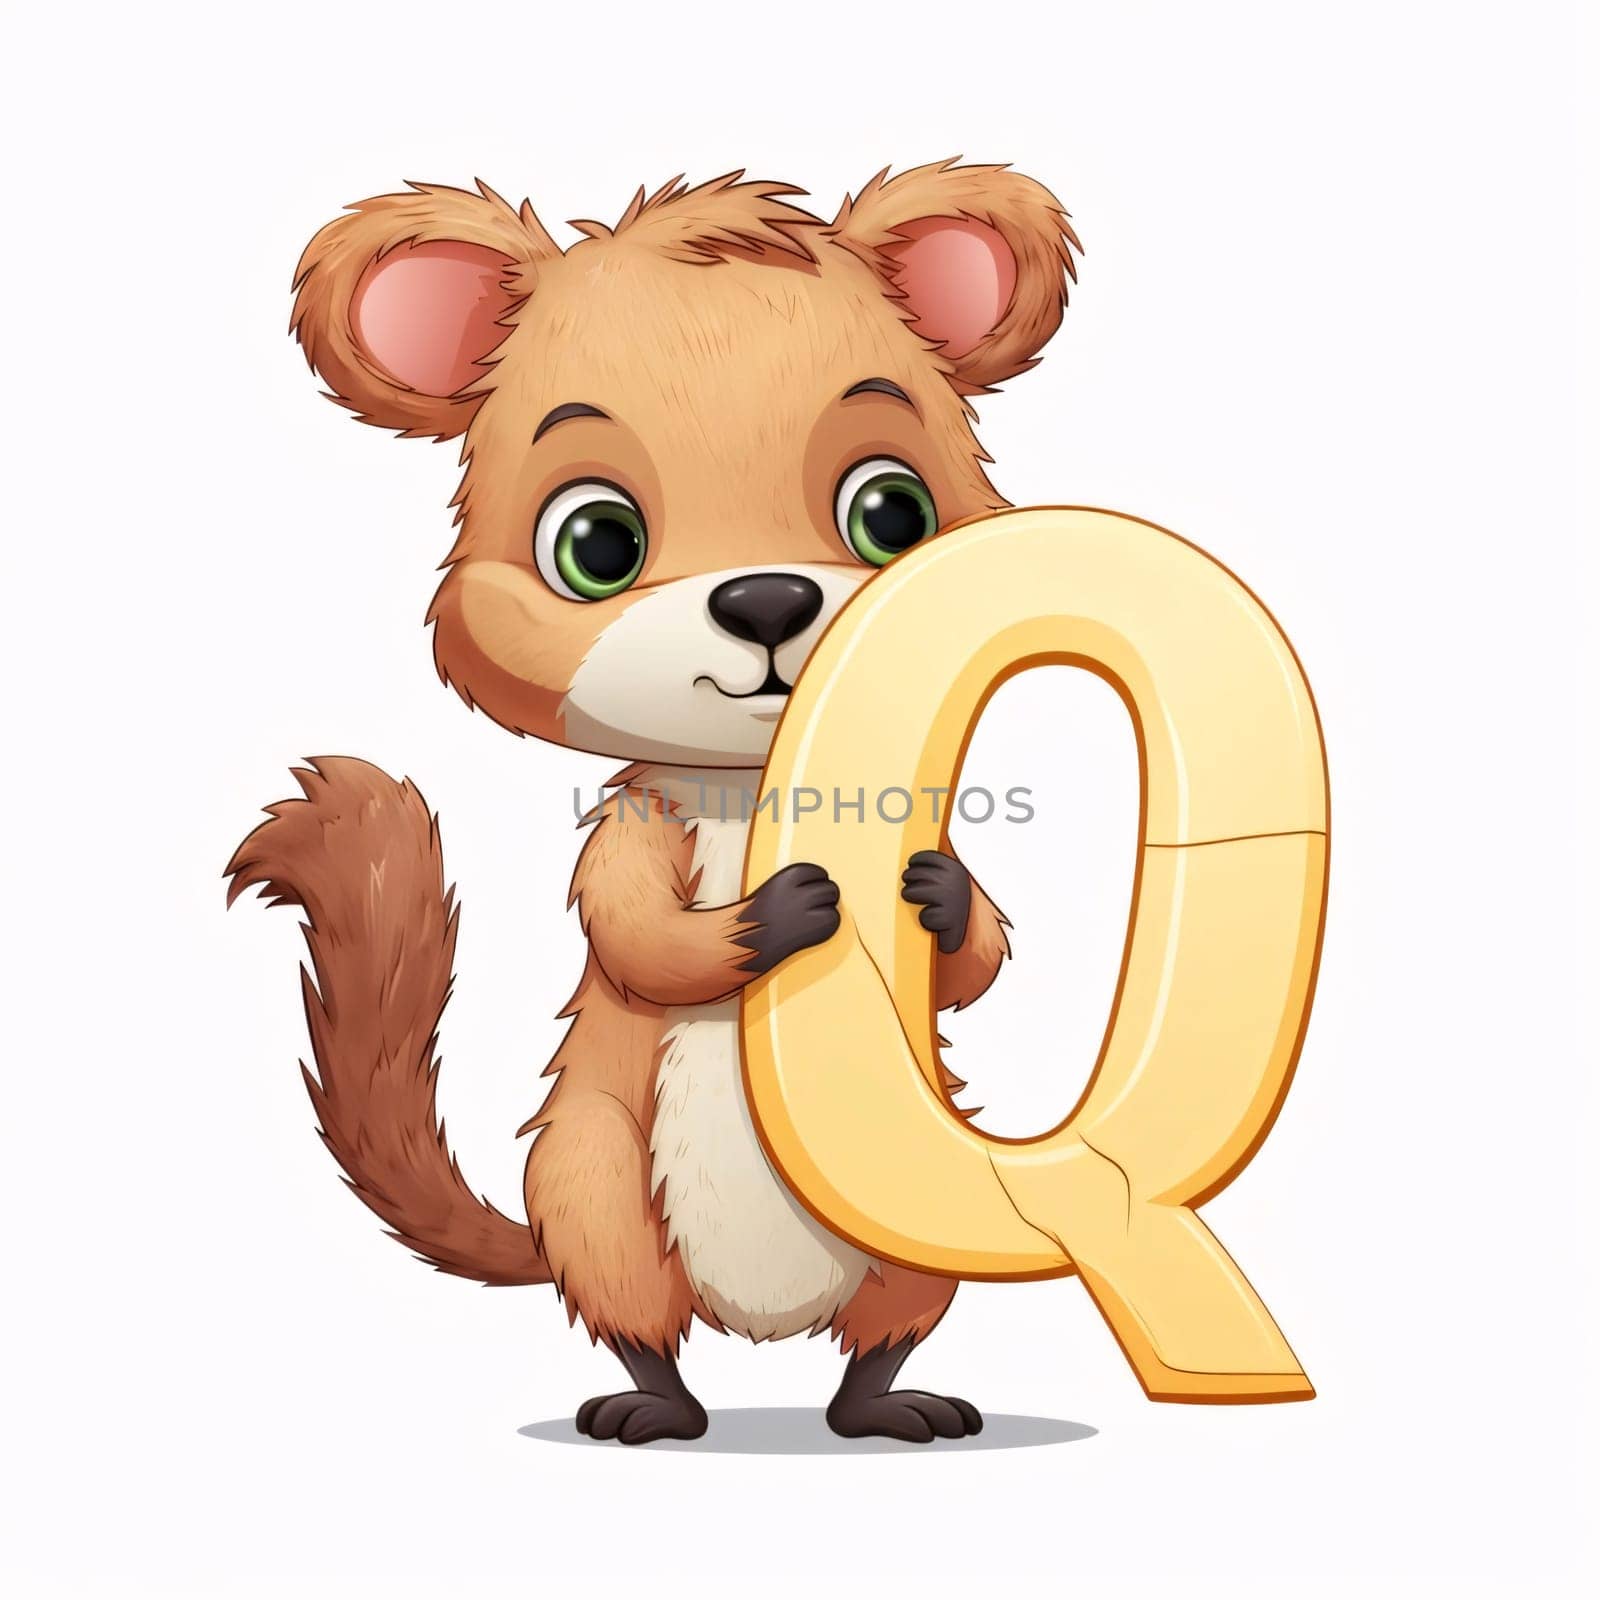 Graphic alphabet letters: Vector illustration of Cute little beaver cartoon character with letter Q